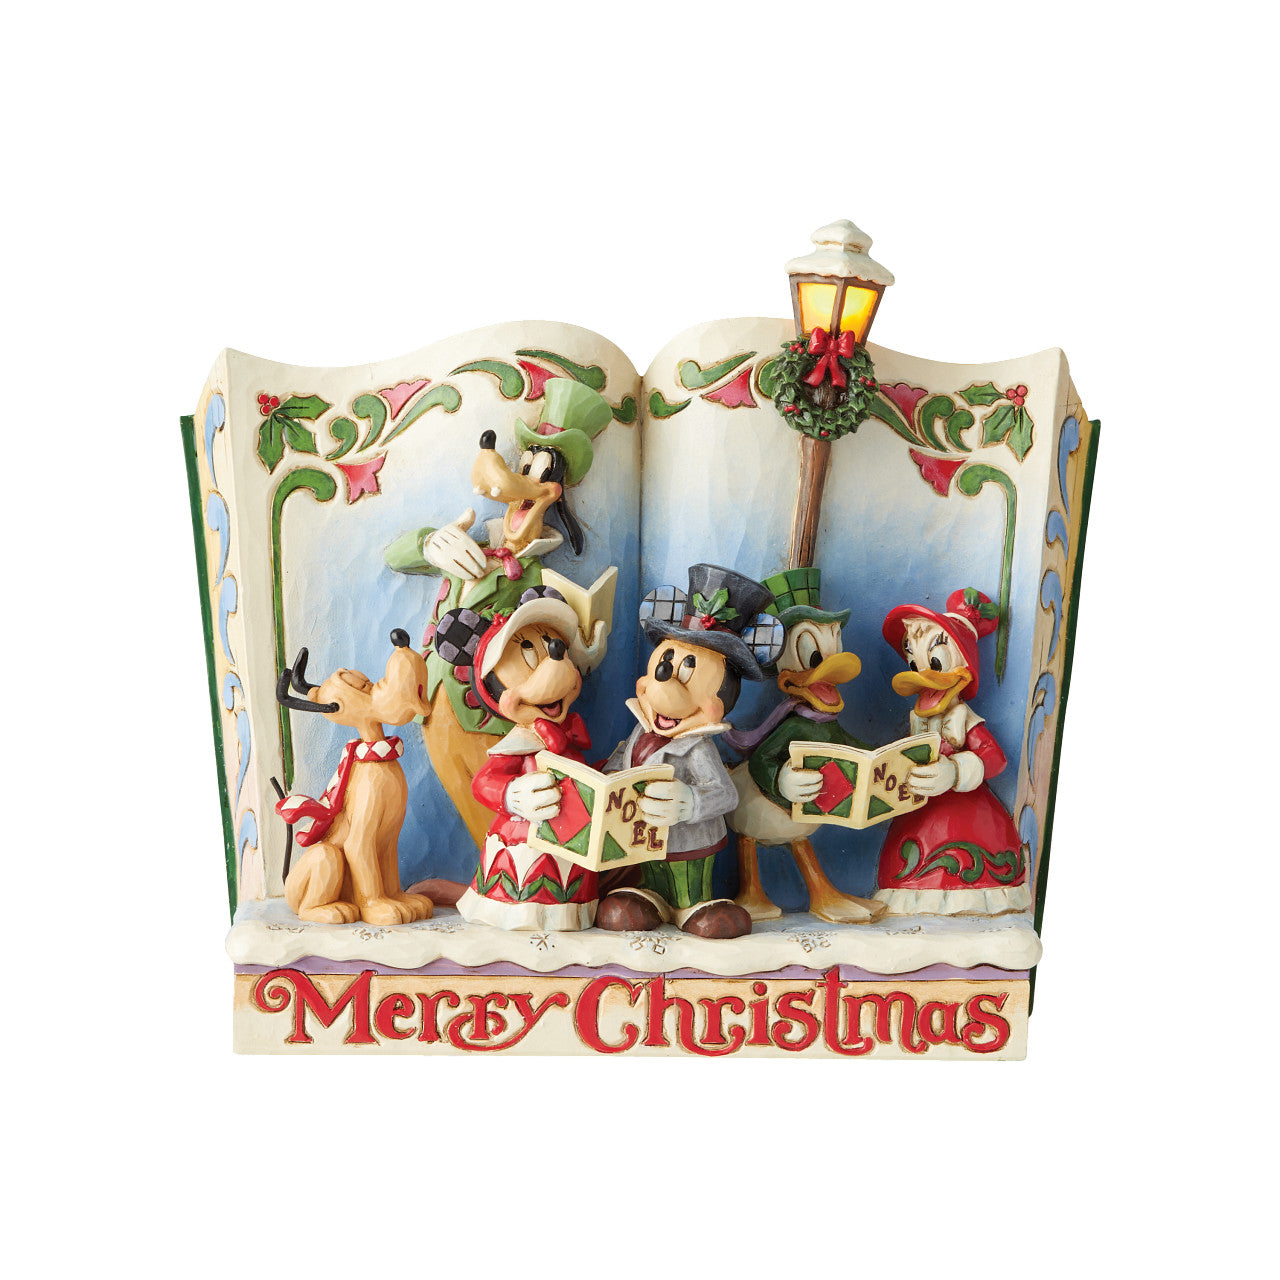 Jim Shore Merry Christmas (Christmas Carol Storybook)  Mickey and friends joyfully celebrate the season by caroling throughout the town. This festive piece by Jim Shore combines the magic of Disney with time-honored motifs of handcrafted folk art. 